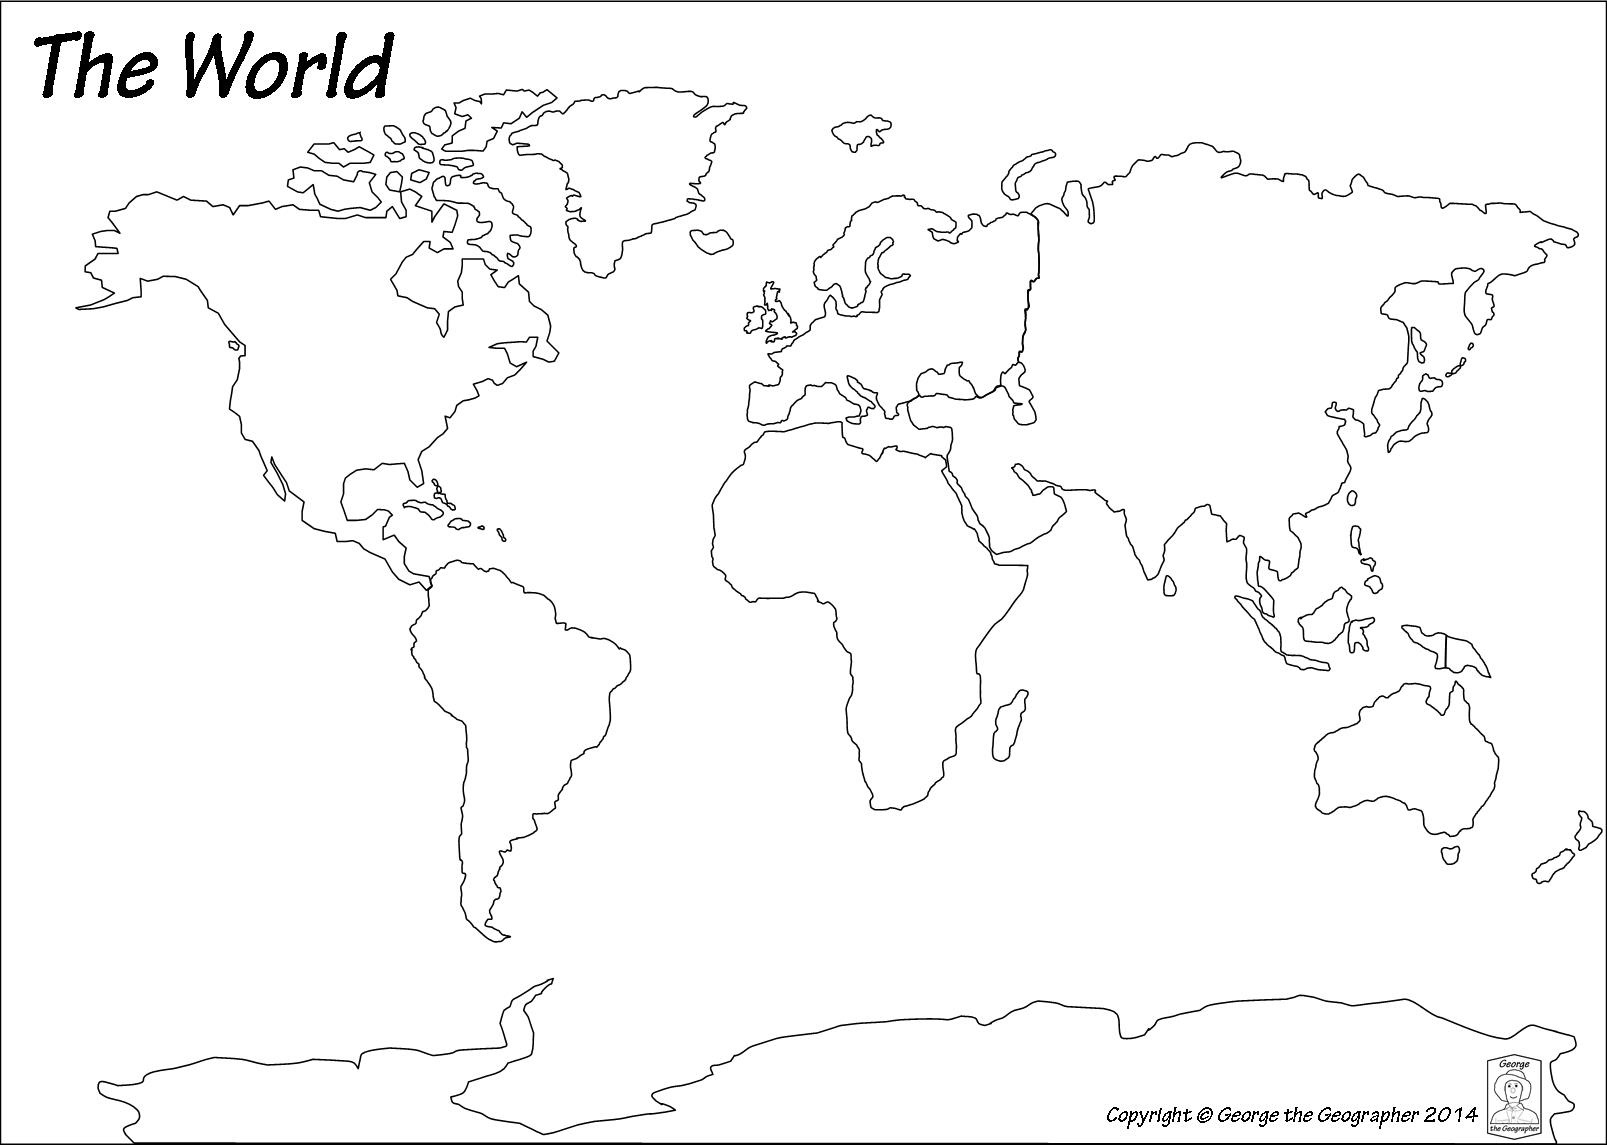 Outline Base Maps - Free Printable Map Of Continents And Oceans